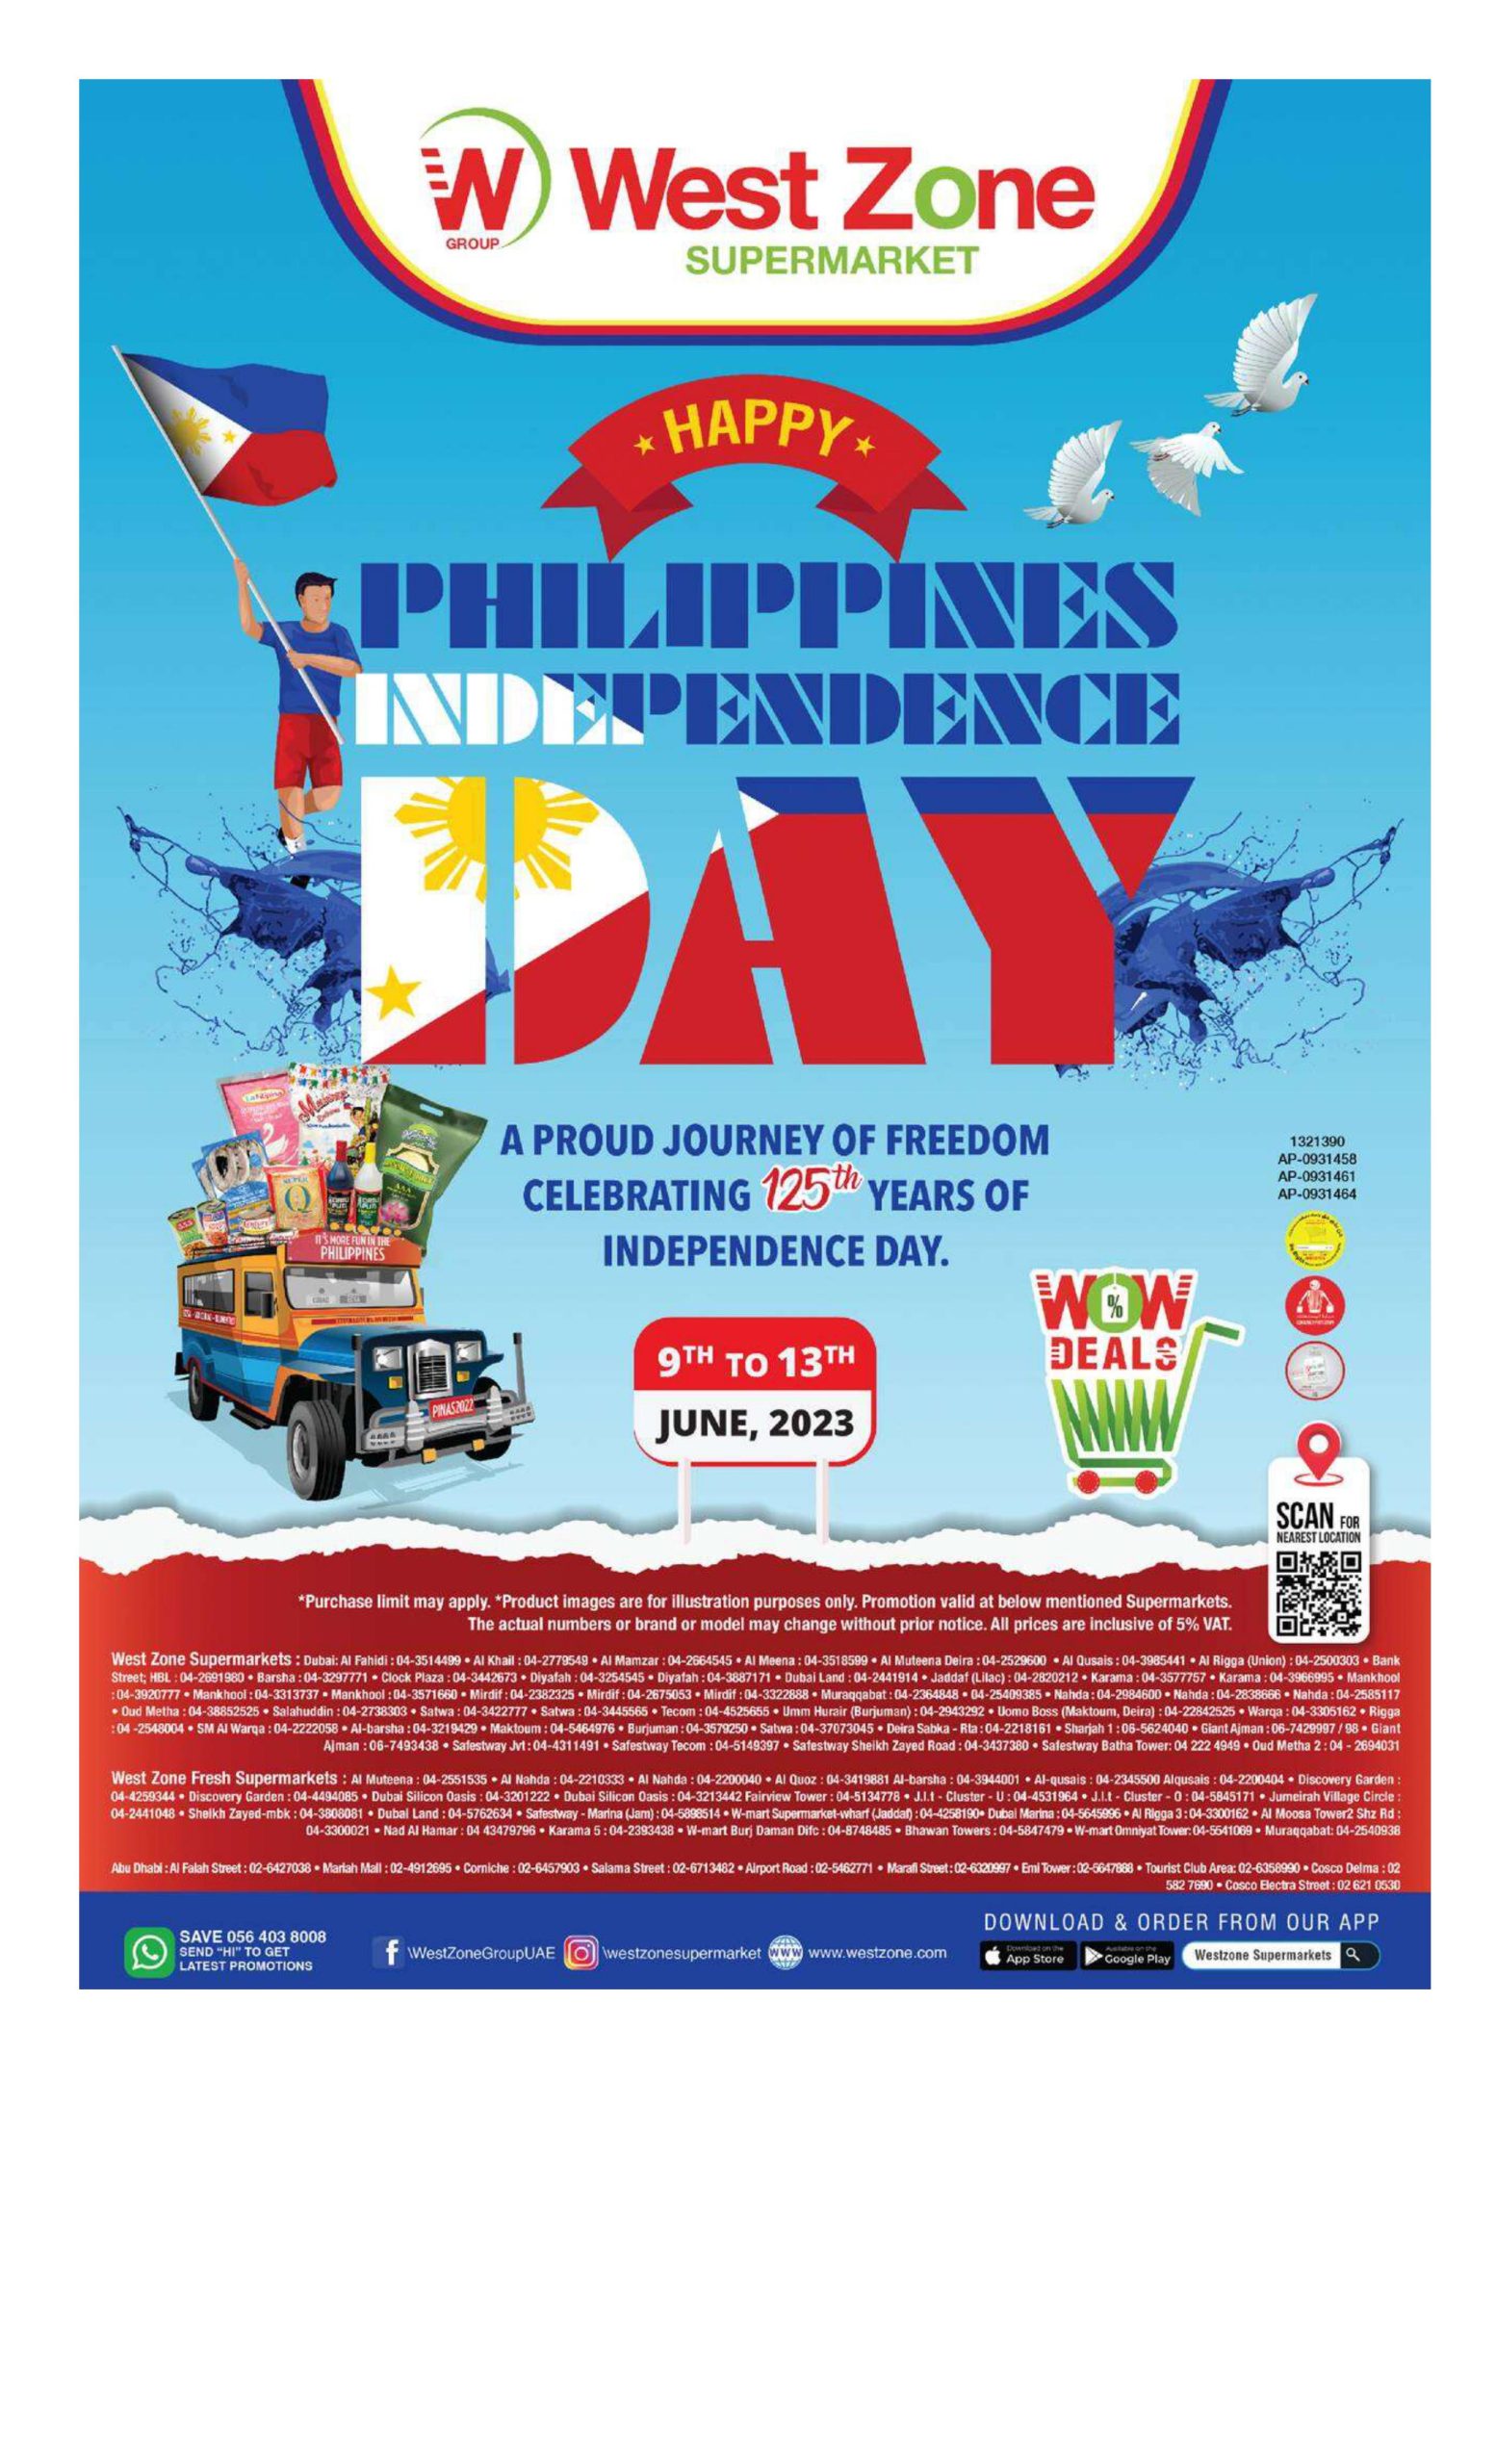 West Zone Philippines Independence Day Offers Today